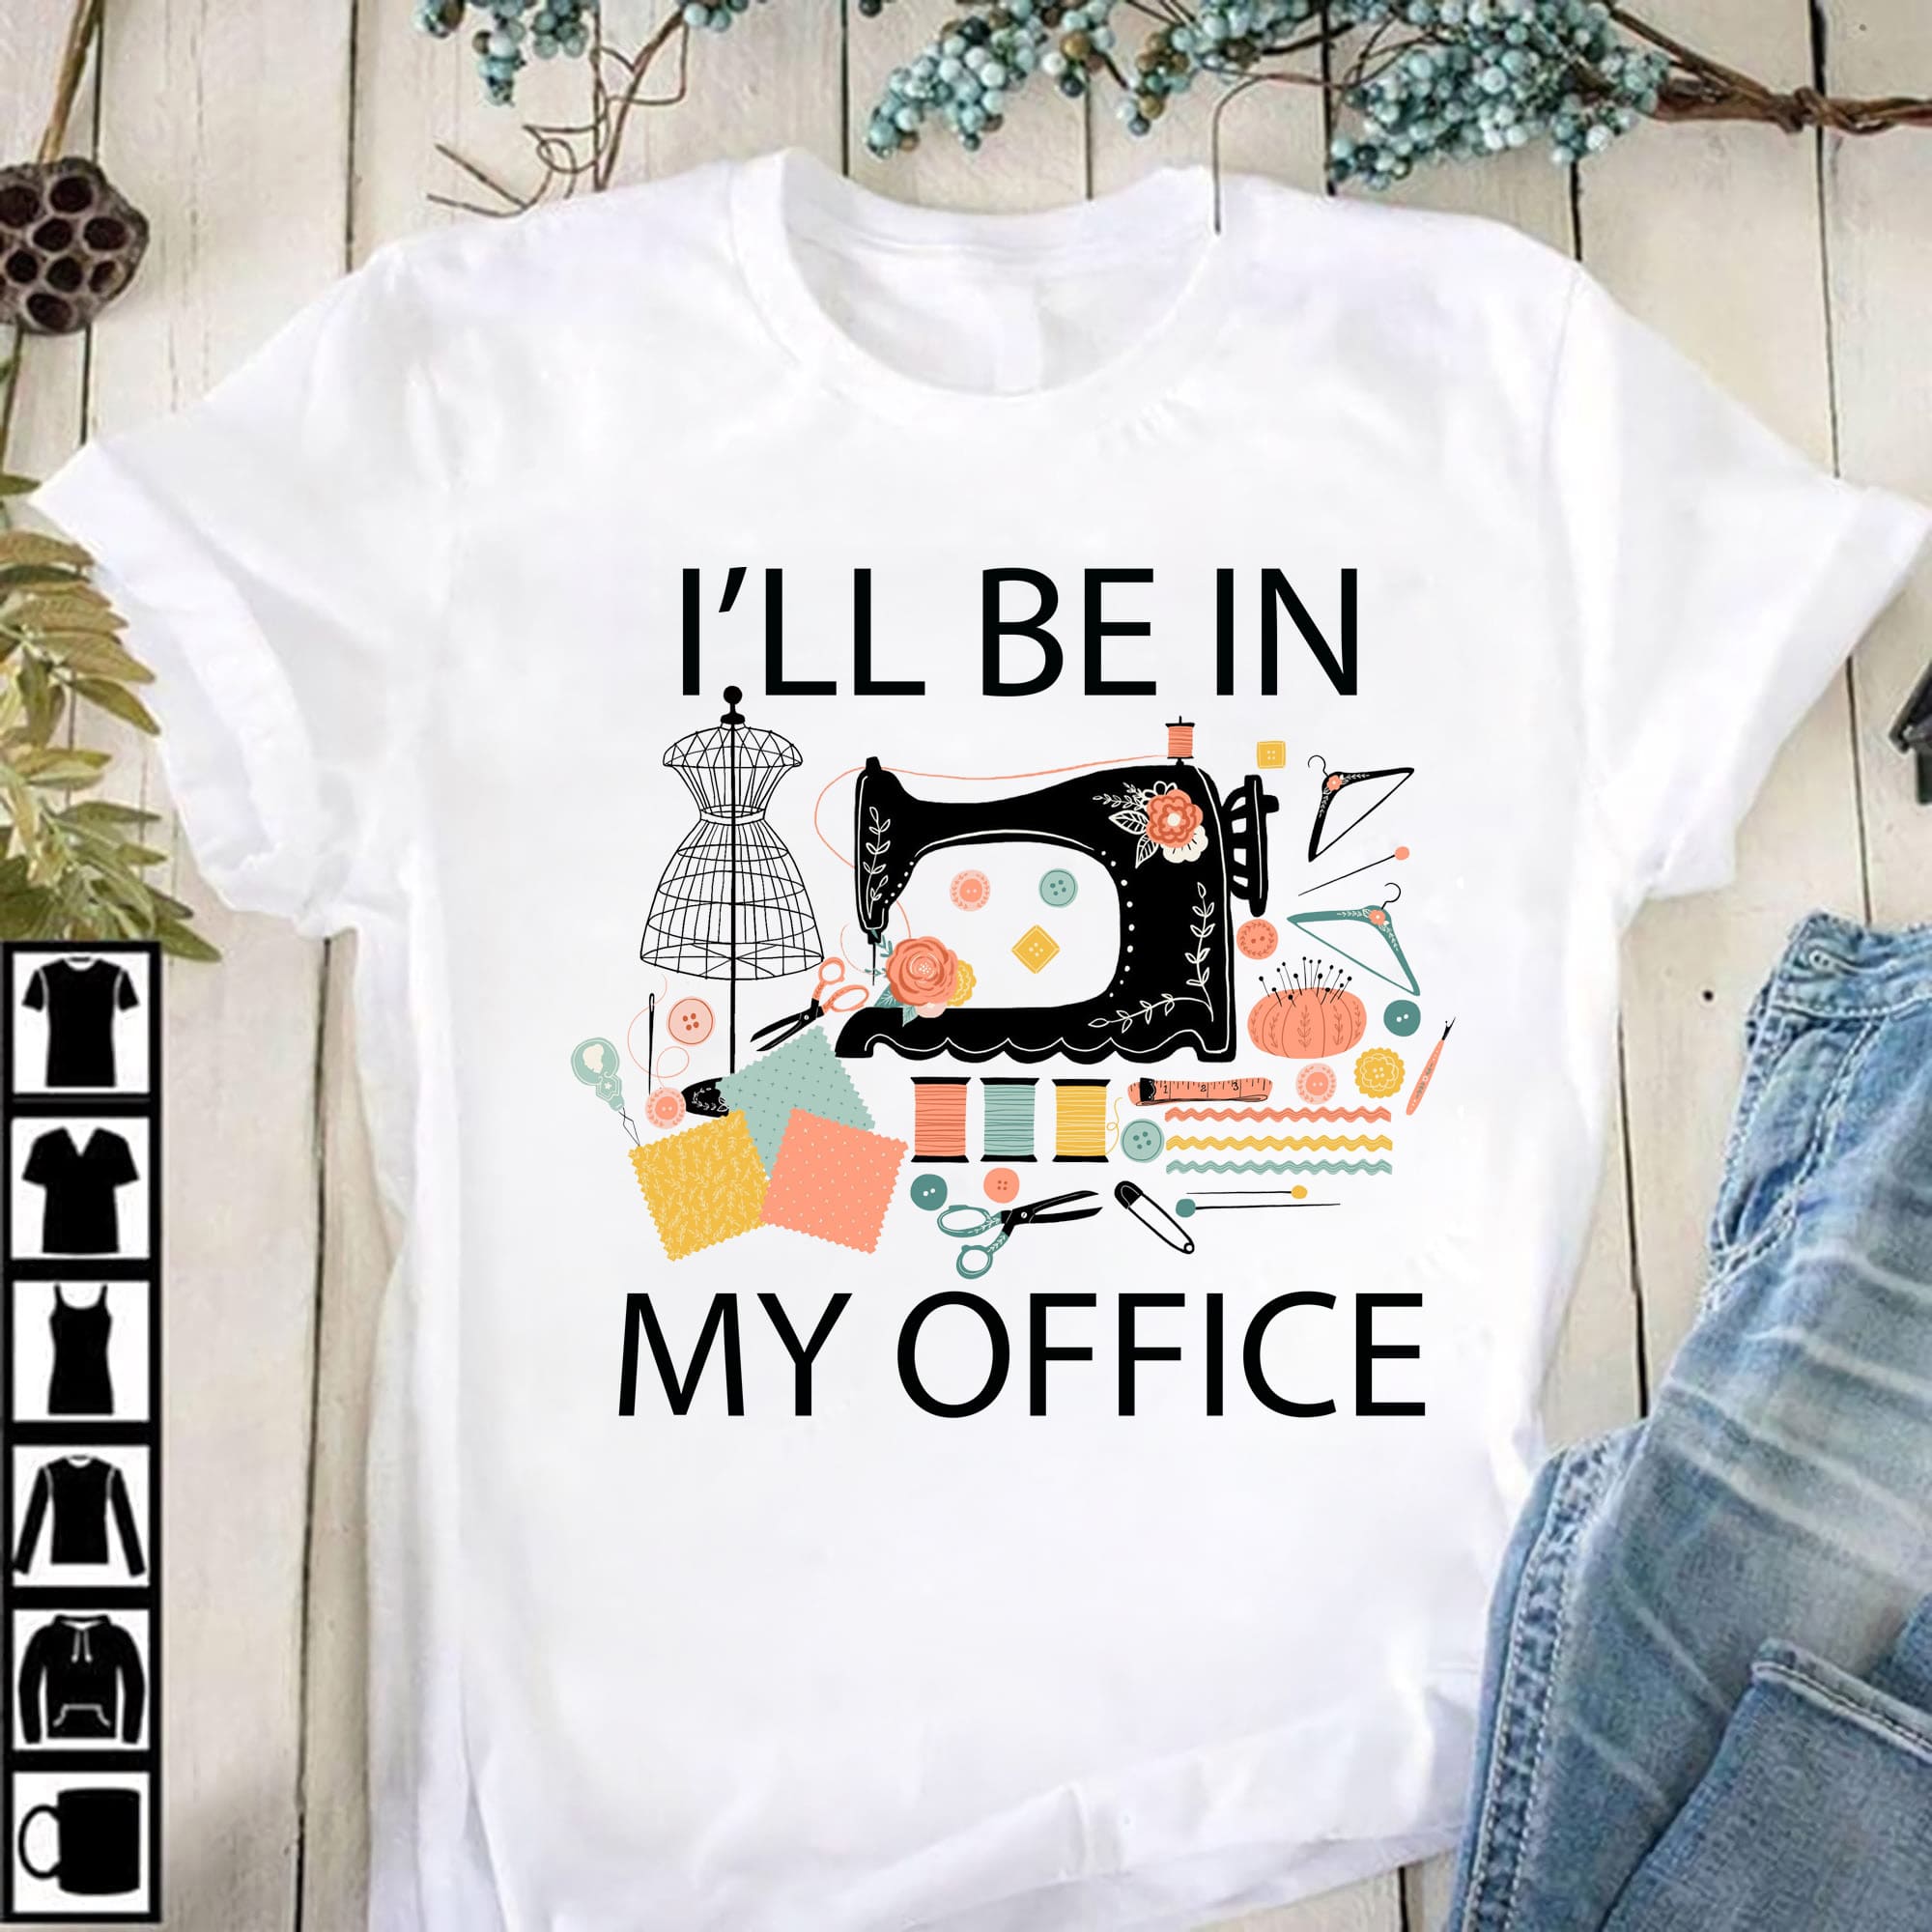 Sewing Machine - I'll be in my office